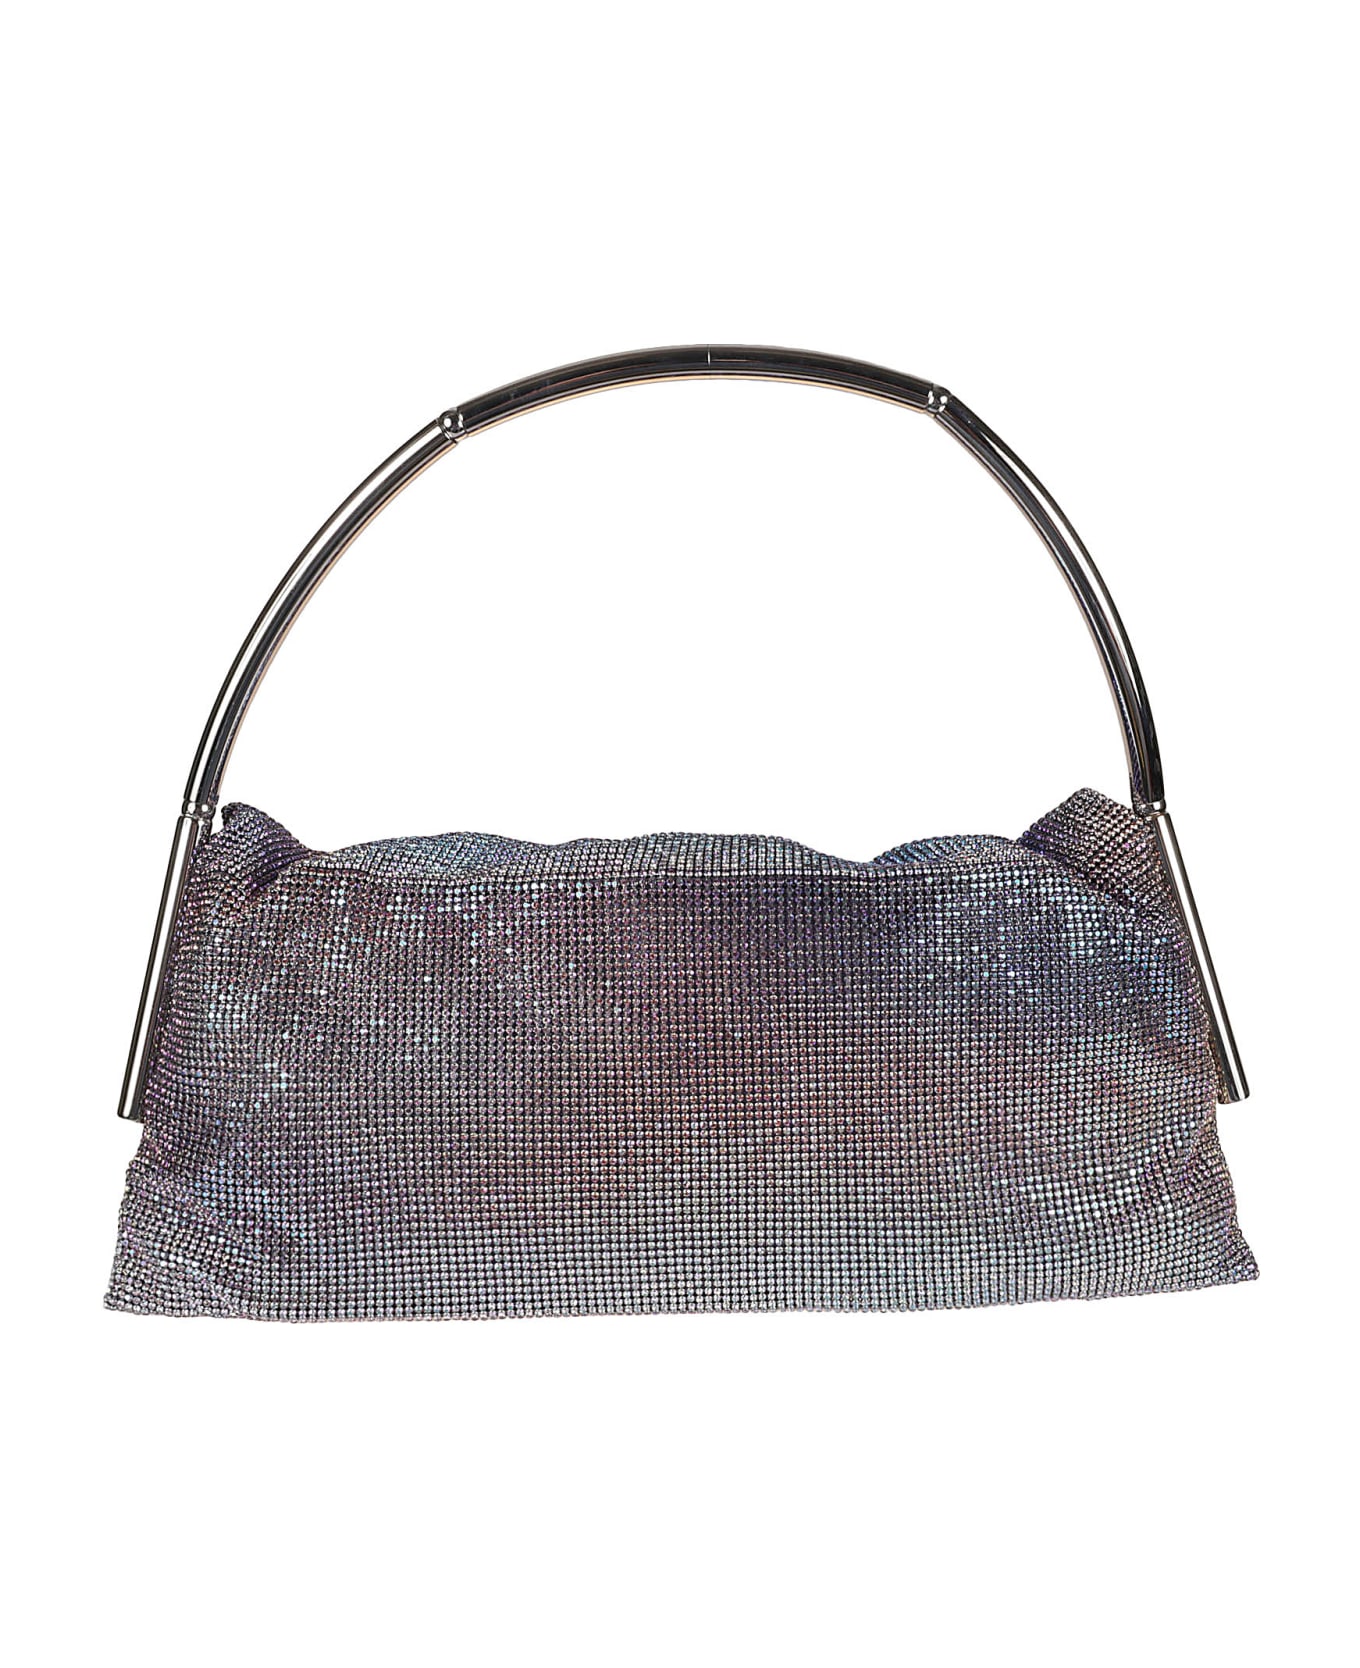 Benedetta Bruzziches Metallic Handle Embellished All-over Tote -  spectre トートバッグ